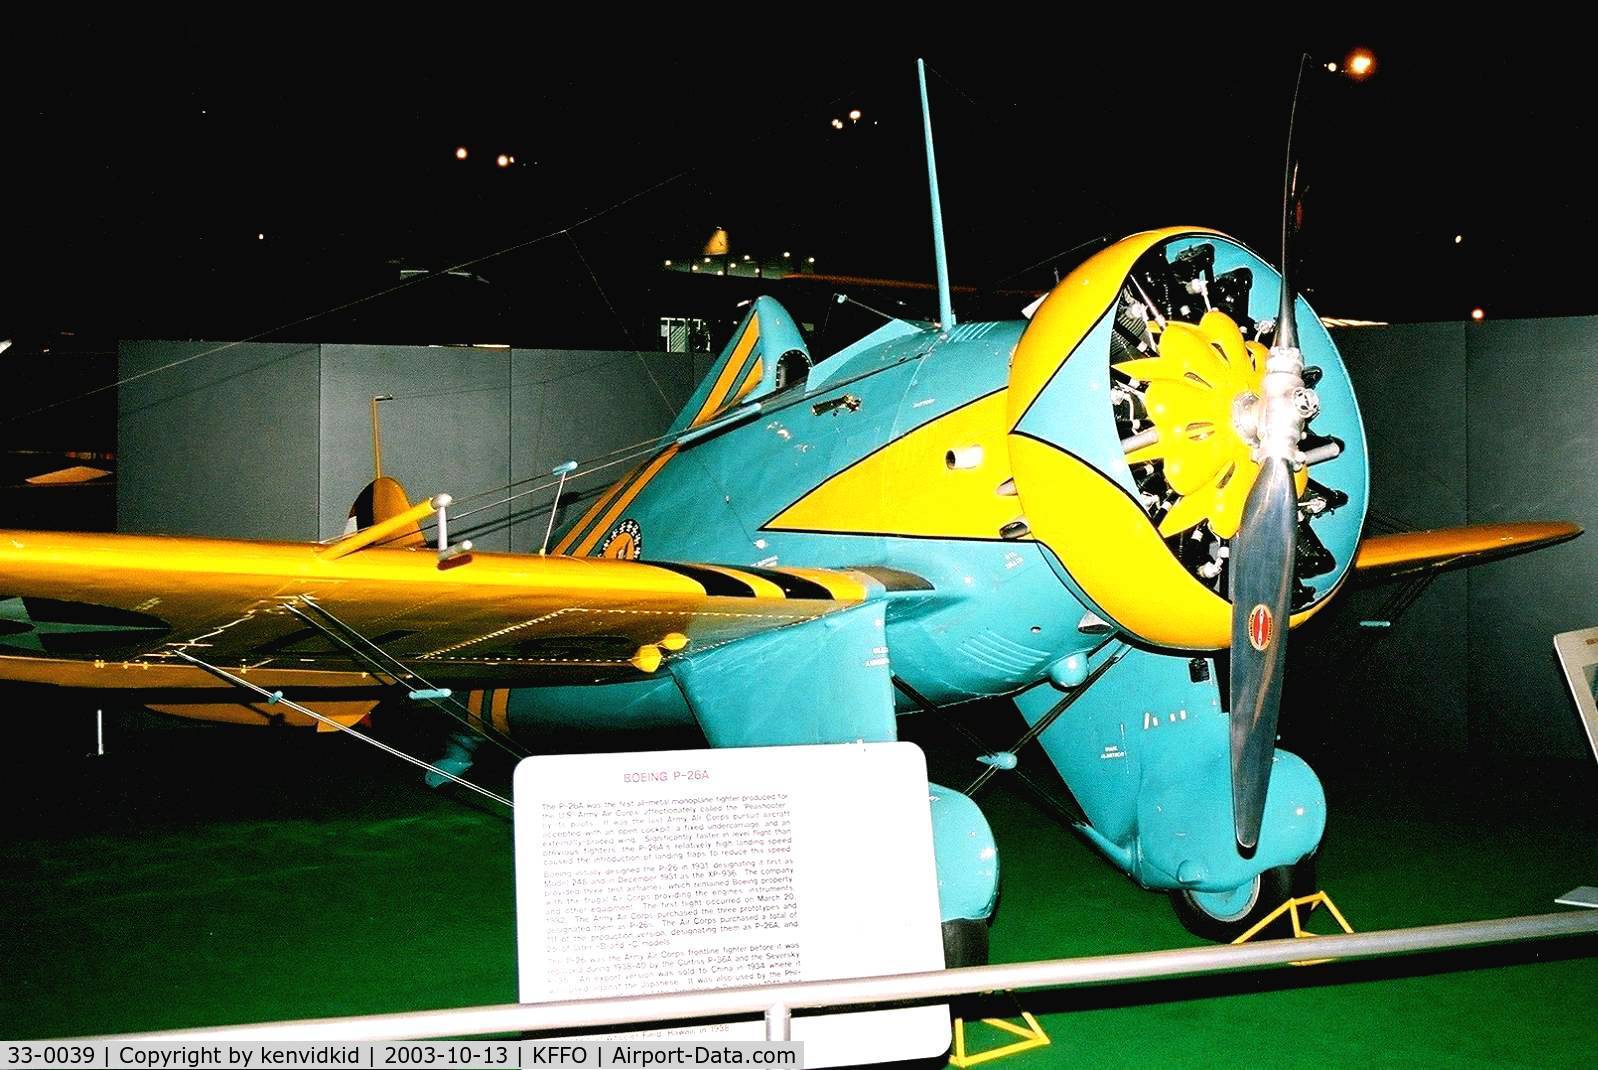 33-0039, 1933 Boeing P-26A Replica C/N 1815, At The Museum of the United States Air Force Dayton Ohio.